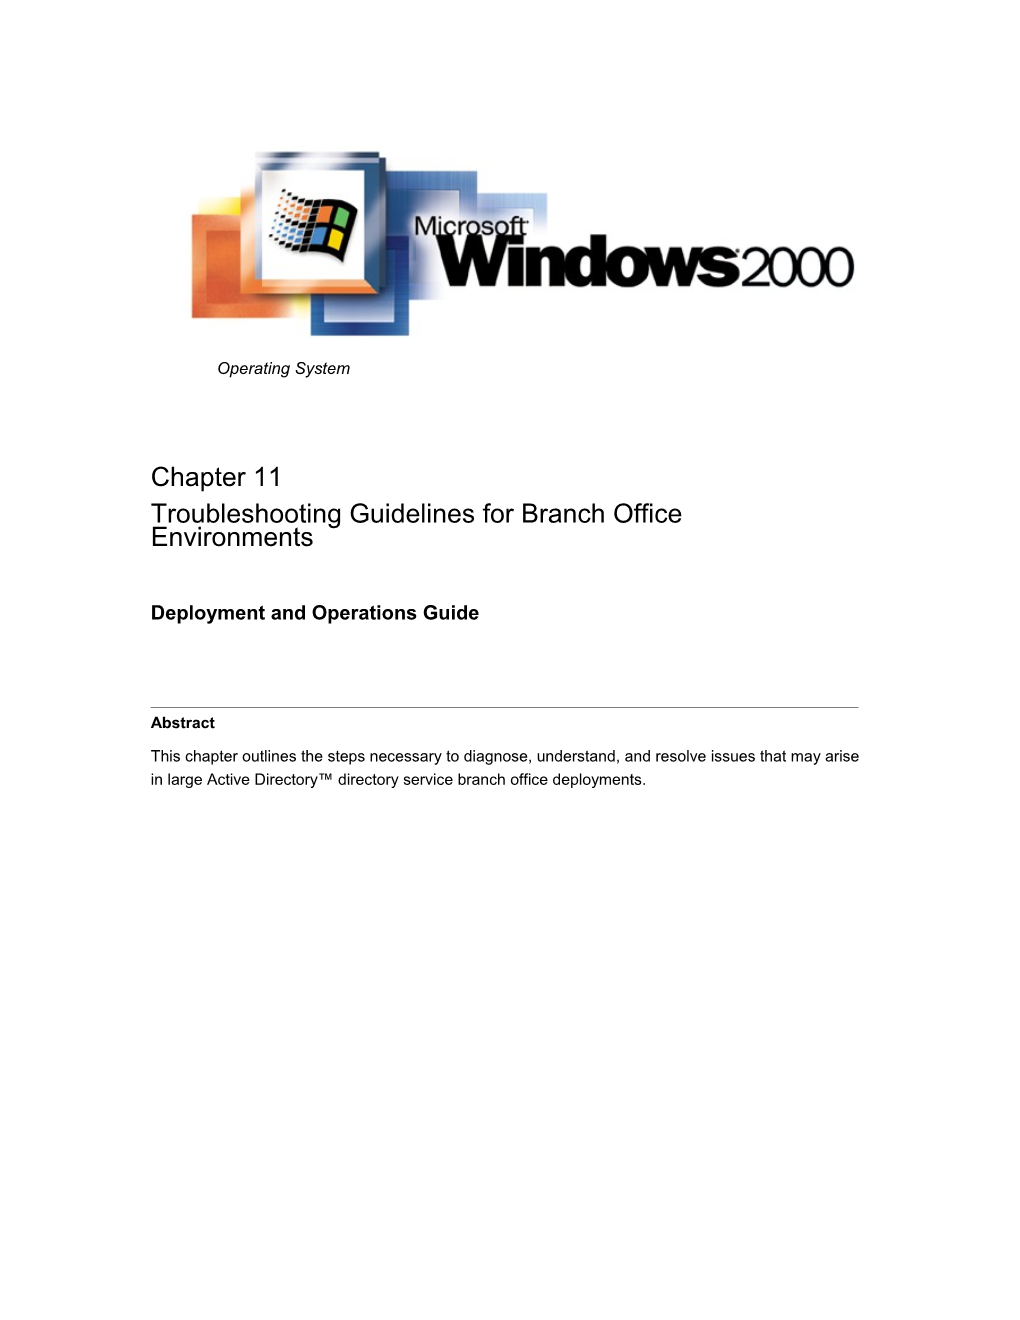 Troubleshooting Guidelines for Branch Office Environments